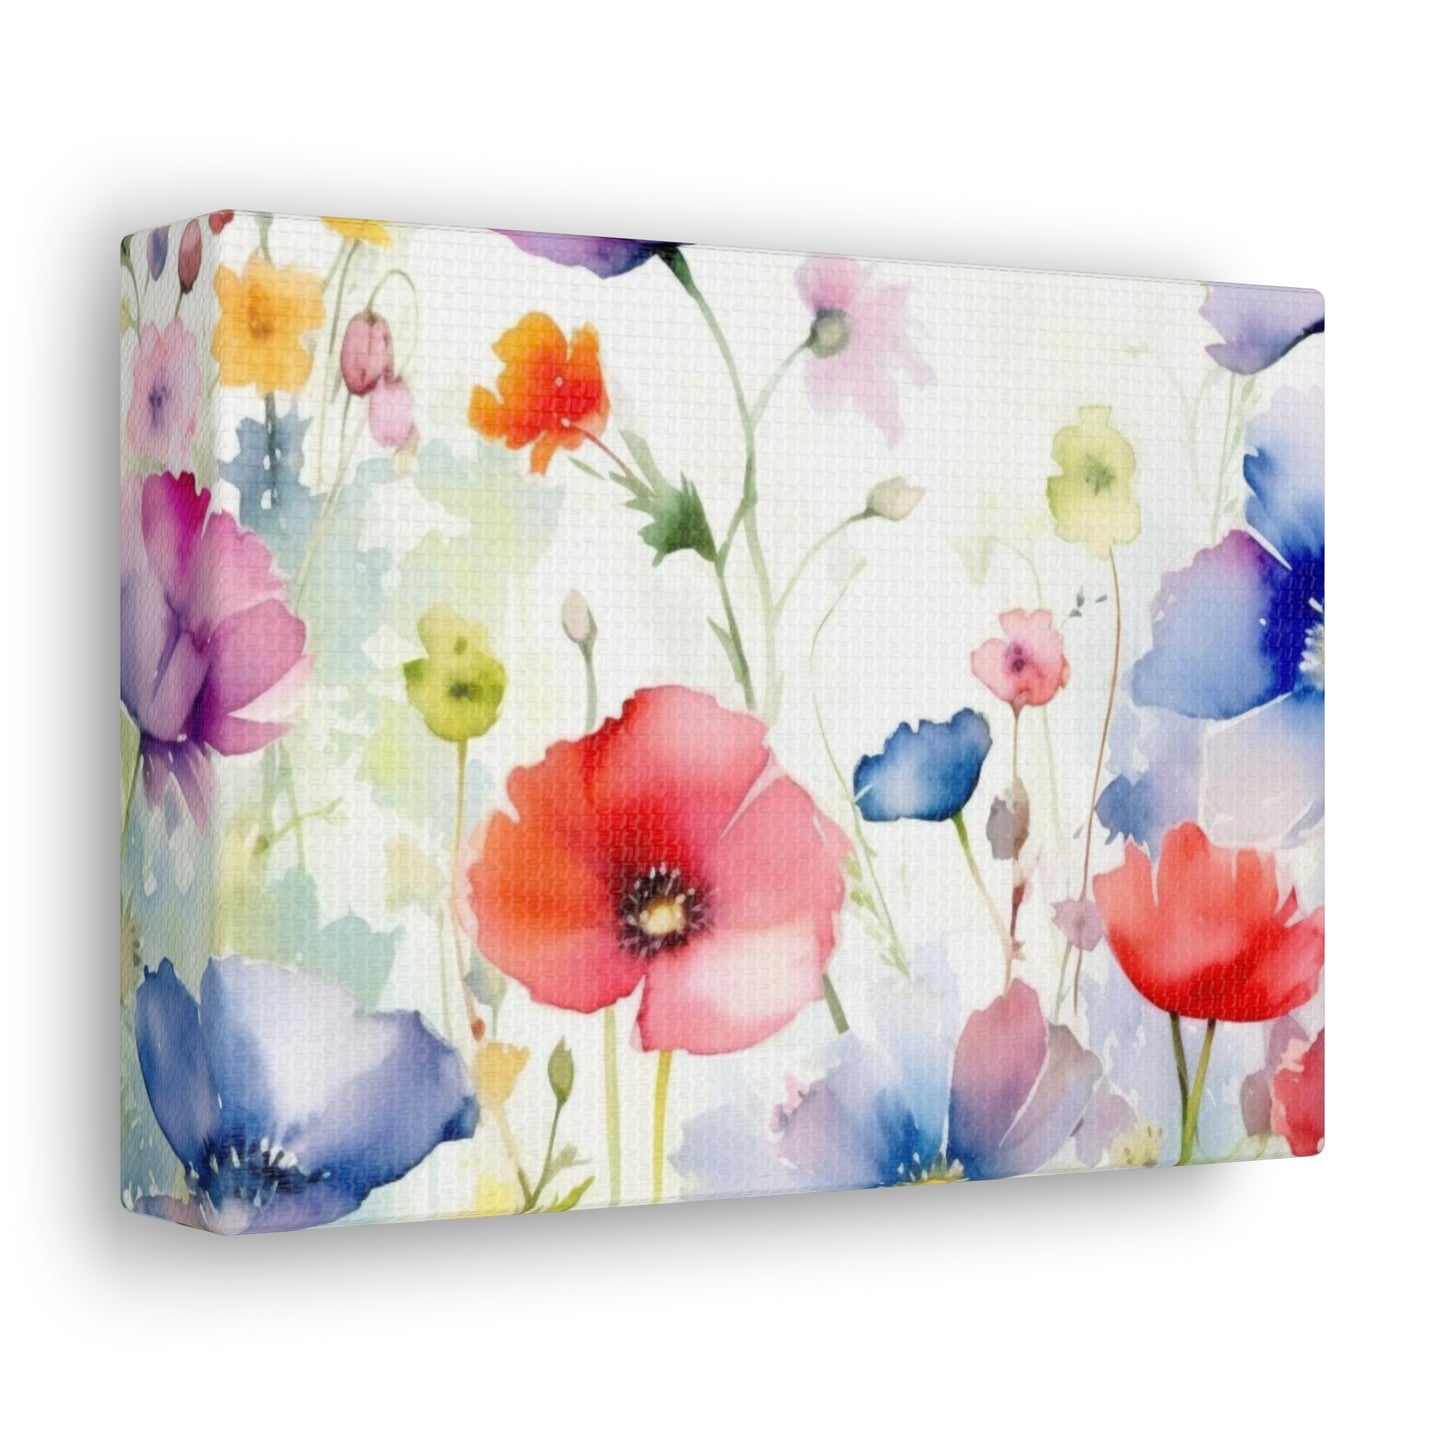 Wildflowers Canvas Gallery Wrap, Watercolor Floral Wall Art Print Decor Small Large Hanging Modern Landscape Living Room